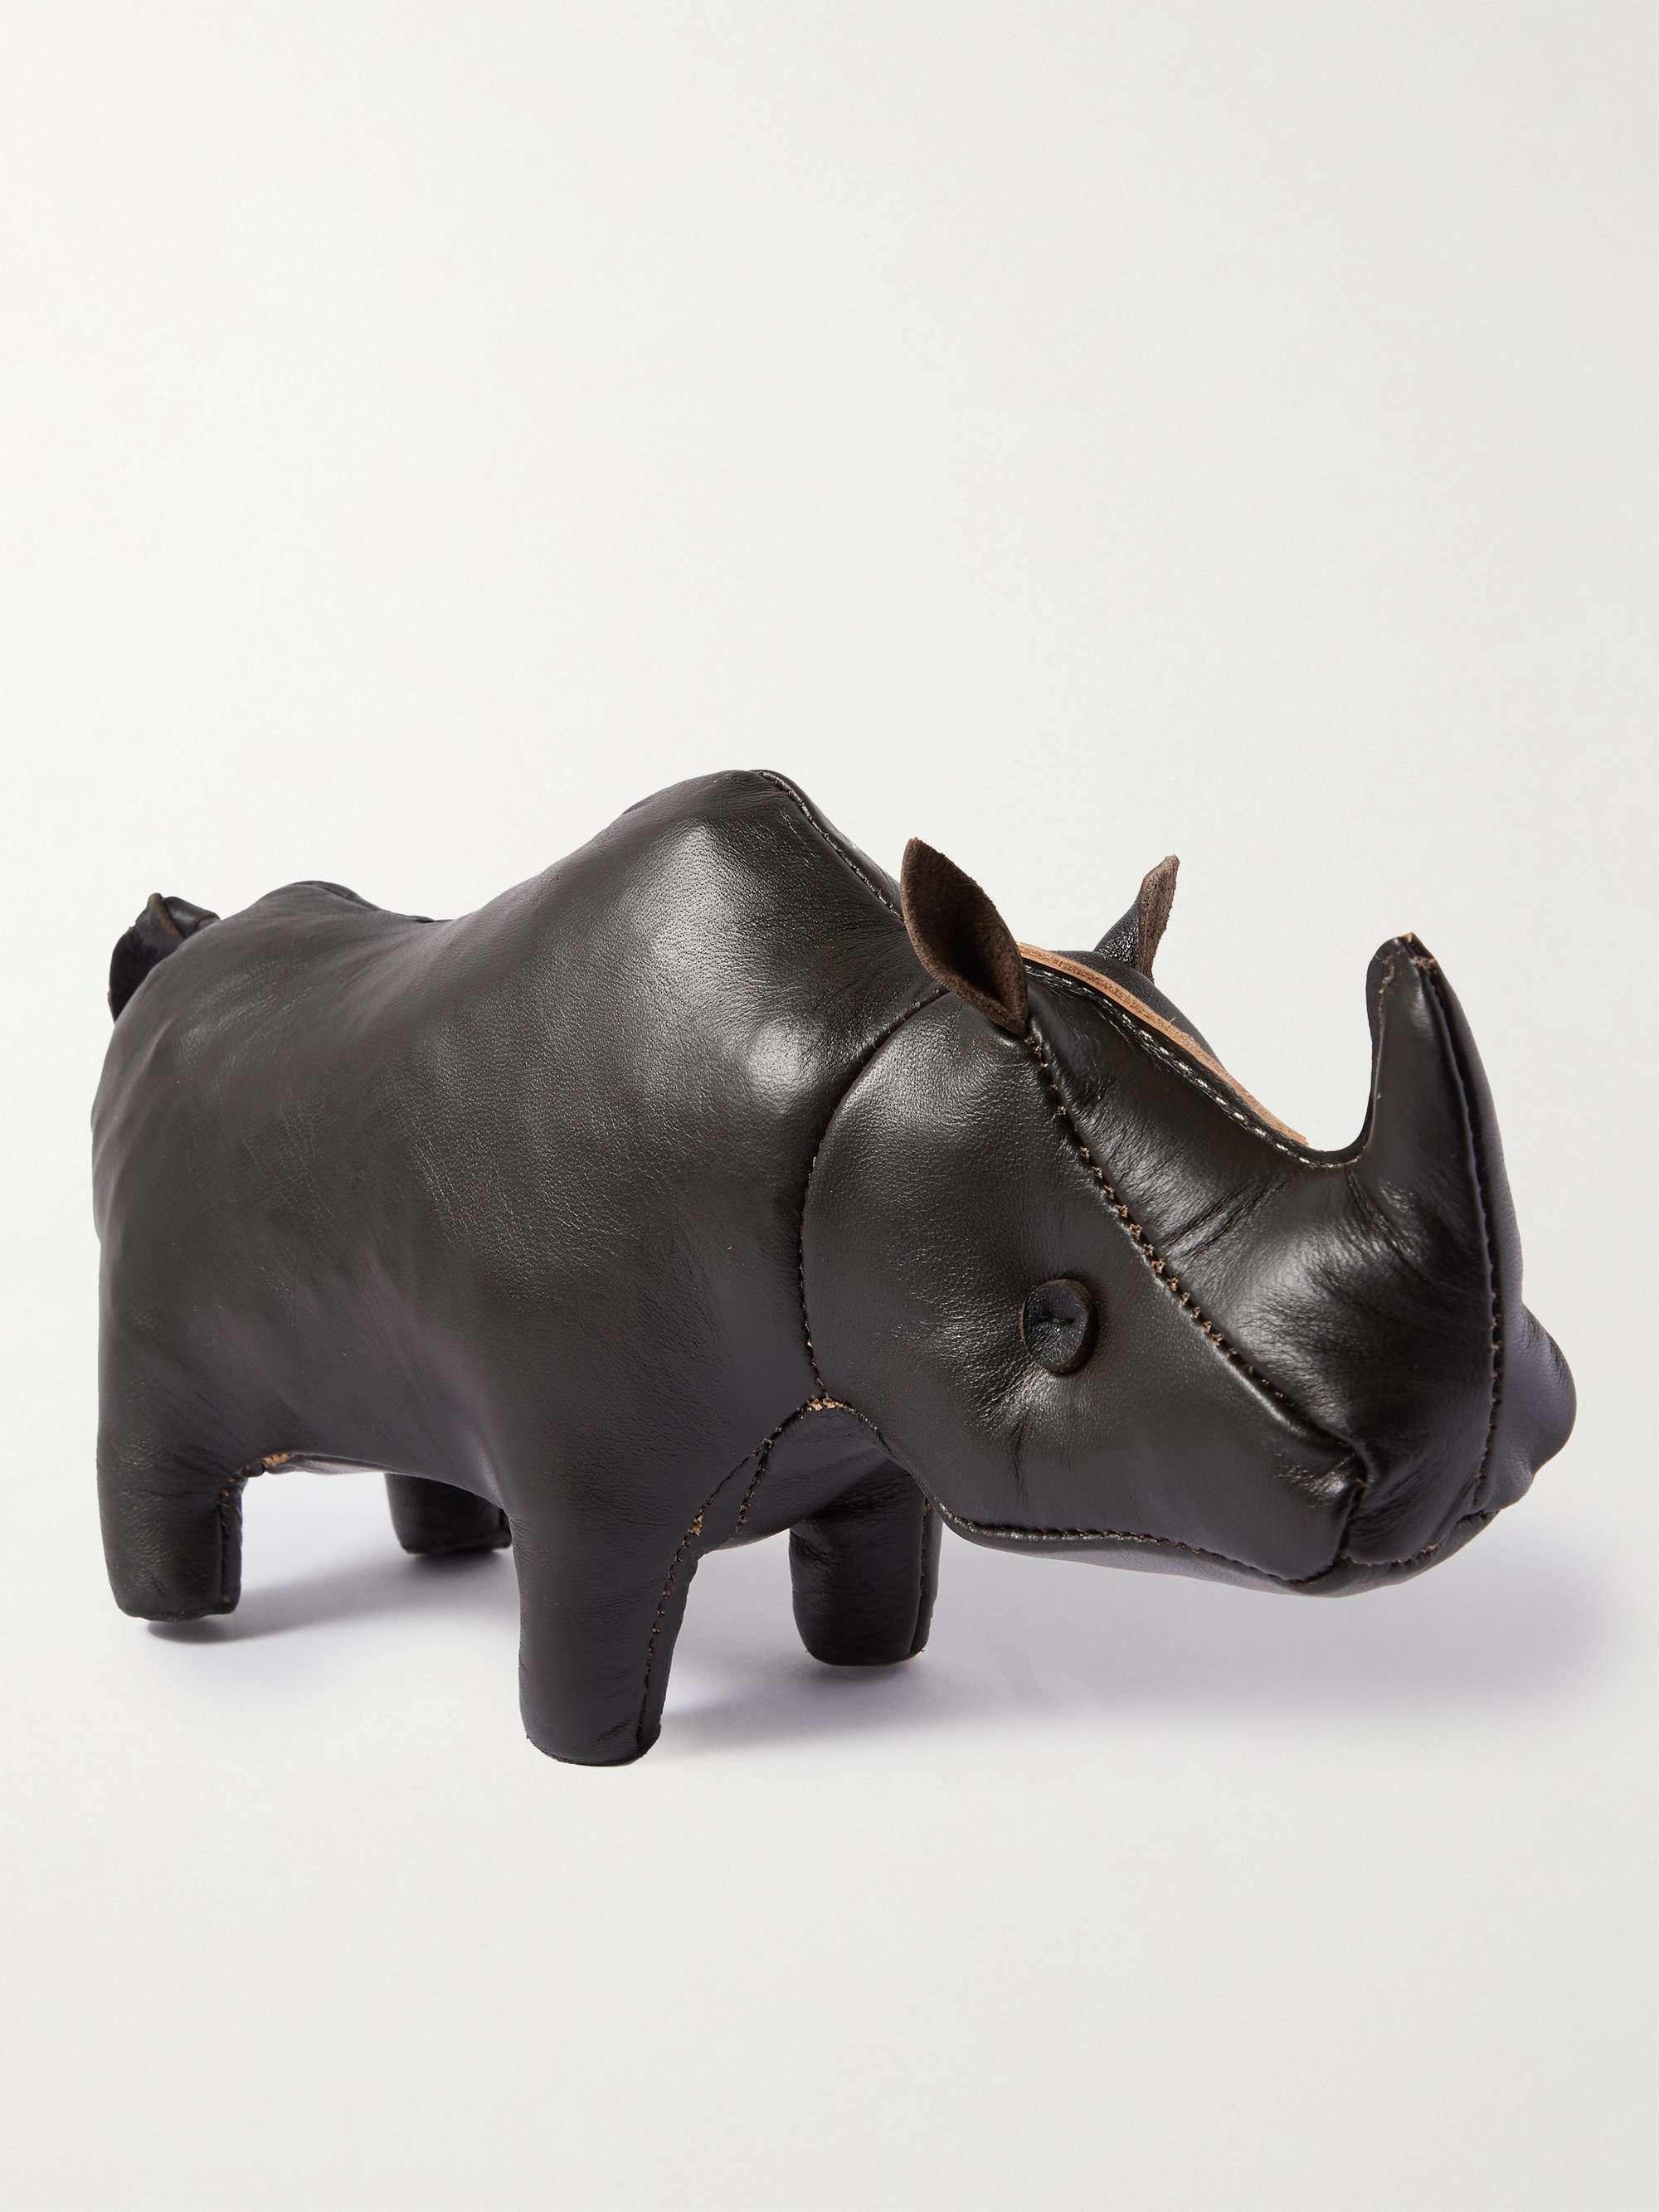 THE REAL MCCOY'S Rhino Leather Ornament | MR PORTER